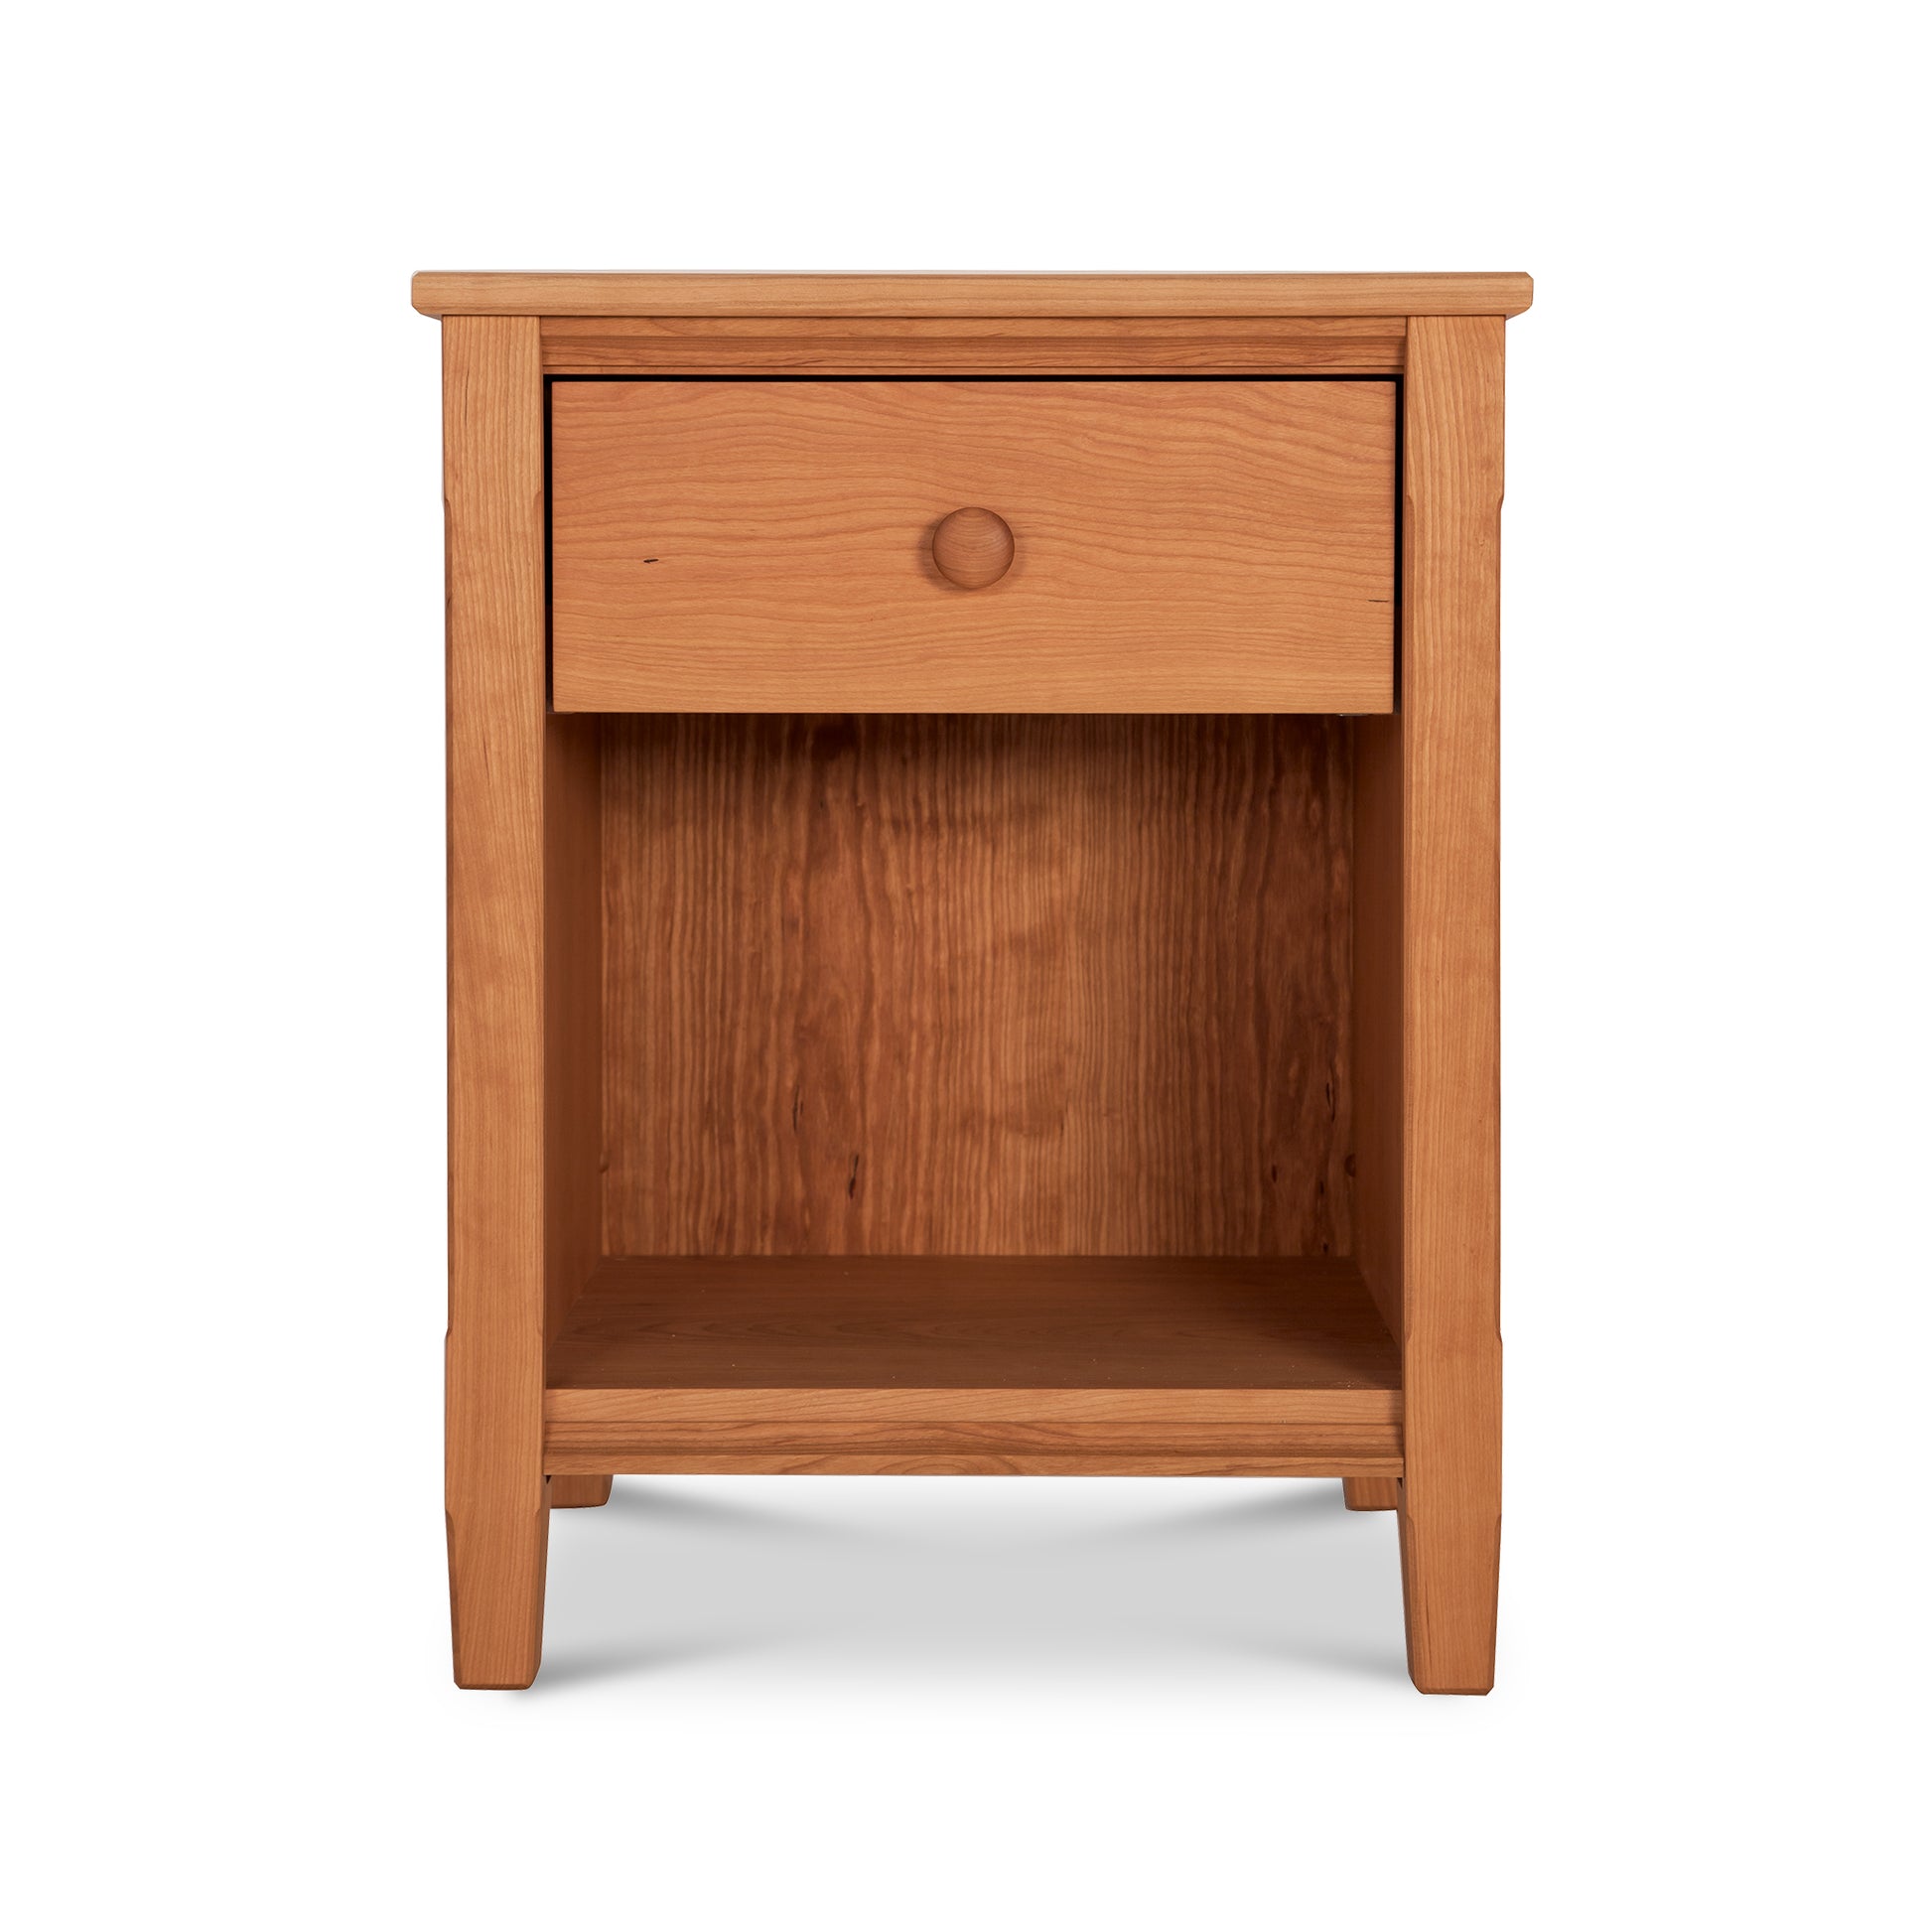 A Maple Corner Woodworks Vermont Shaker 1-Drawer Enclosed Shelf Nightstand featuring a single drawer with a round knob and an open shelf below. The nightstand is made from natural cherry wood and is photographed against a white background, showcasing exquisite Vermont craftsmanship.